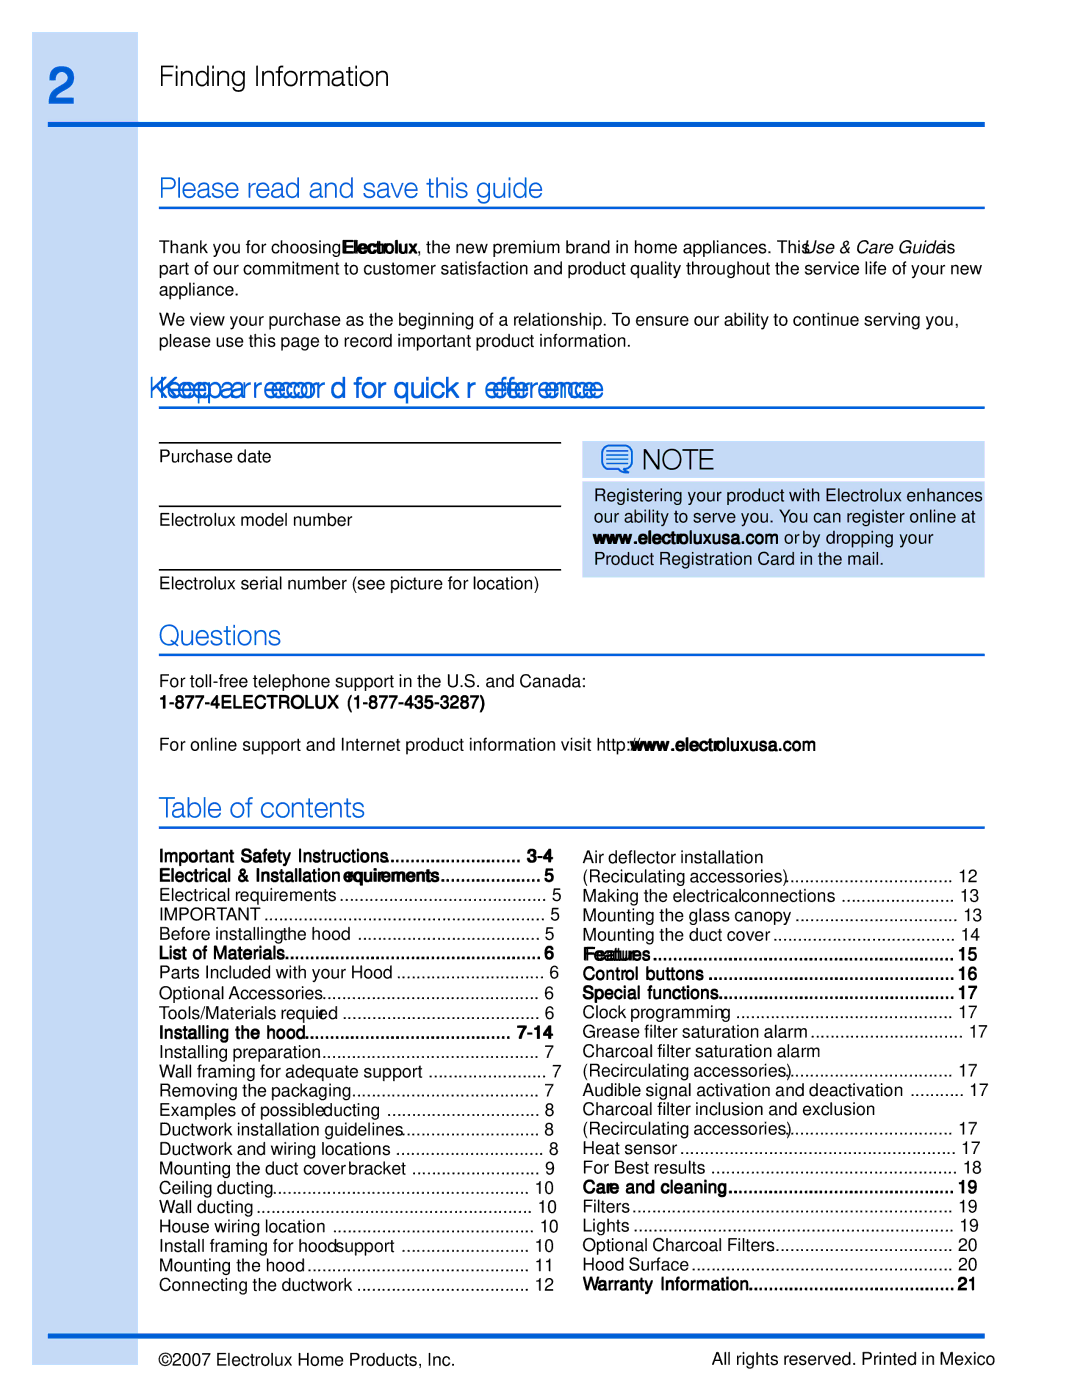 Electrolux EI30WC60GS Please read and save this guide, Keep a record for quick reference, Questions?, Table of contents 